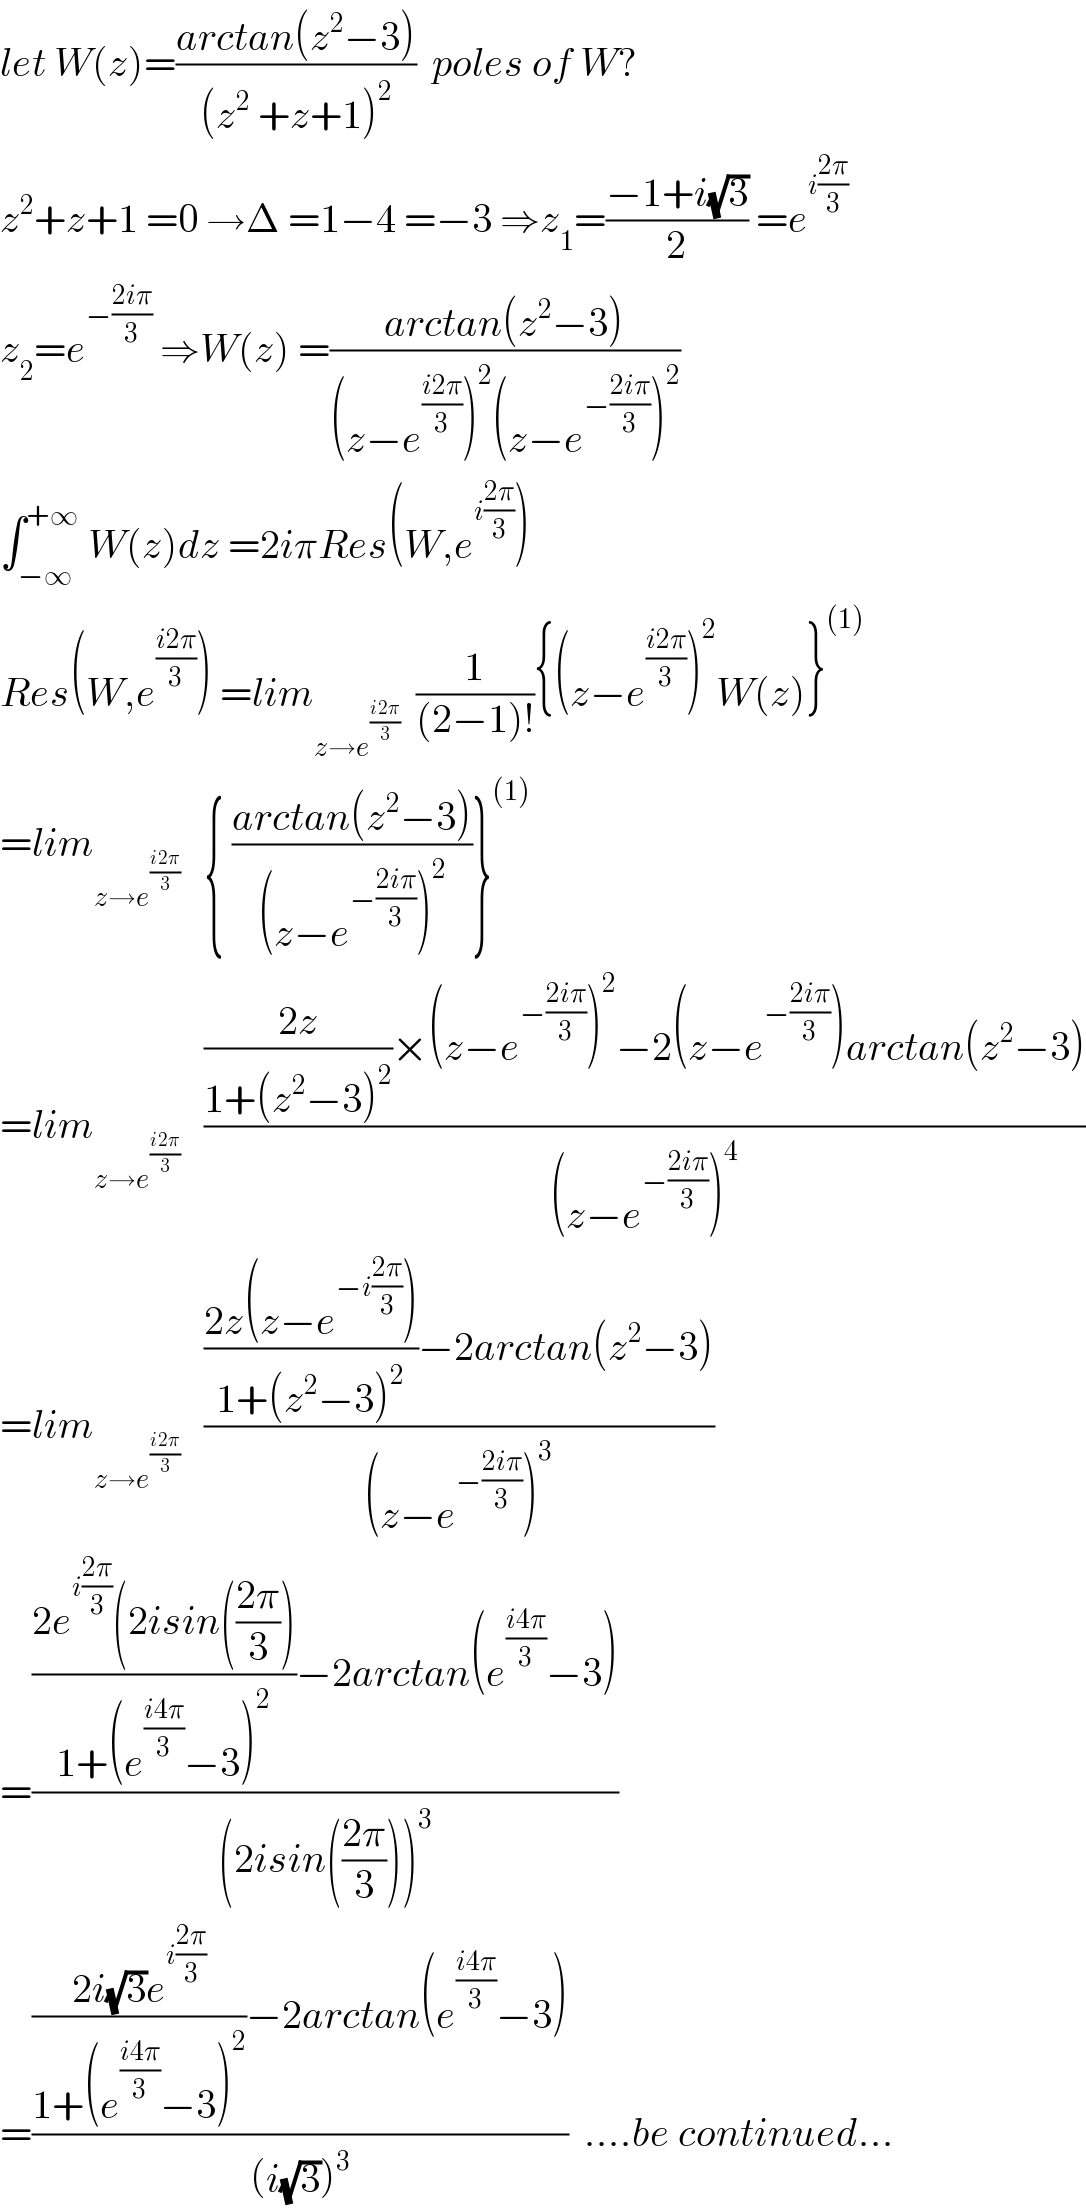 let W(z)=((arctan(z^2 −3))/((z^2  +z+1)^2 ))  poles of W?  z^2 +z+1 =0 →Δ =1−4 =−3 ⇒z_1 =((−1+i(√3))/2) =e^(i((2π)/3))   z_2 =e^(−((2iπ)/3))  ⇒W(z) =((arctan(z^2 −3))/((z−e^((i2π)/3) )^2 (z−e^(−((2iπ)/3)) )^2 ))  ∫_(−∞) ^(+∞)  W(z)dz =2iπRes(W,e^(i((2π)/3)) )  Res(W,e^((i2π)/3) ) =lim_(z→e^((i2π)/3) )   (1/((2−1)!)){(z−e^((i2π)/3) )^2 W(z)}^((1))   =lim_(z→e^((i2π)/3) )    { ((arctan(z^2 −3))/((z−e^(−((2iπ)/3)) )^2 ))}^((1))   =lim_(z→e^((i2π)/3) )    ((((2z)/(1+(z^2 −3)^2 ))×(z−e^(−((2iπ)/3)) )^2 −2(z−e^(−((2iπ)/3)) )arctan(z^2 −3))/((z−e^(−((2iπ)/3)) )^4 ))  =lim_(z→e^((i2π)/3) )    ((((2z(z−e^(−i((2π)/3)) ))/(1+(z^2 −3)^2 ))−2arctan(z^2 −3))/((z−e^(−((2iπ)/3)) )^3 ))  =((((2e^(i((2π)/3)) (2isin(((2π)/3)))/(1+(e^((i4π)/3) −3)^2 ))−2arctan(e^((i4π)/3) −3))/((2isin(((2π)/3)))^3 ))  =((((2i(√3)e^(i((2π)/3)) )/(1+(e^((i4π)/3) −3)^2 ))−2arctan(e^((i4π)/3) −3))/((i(√3))^3 ))  ....be continued...  